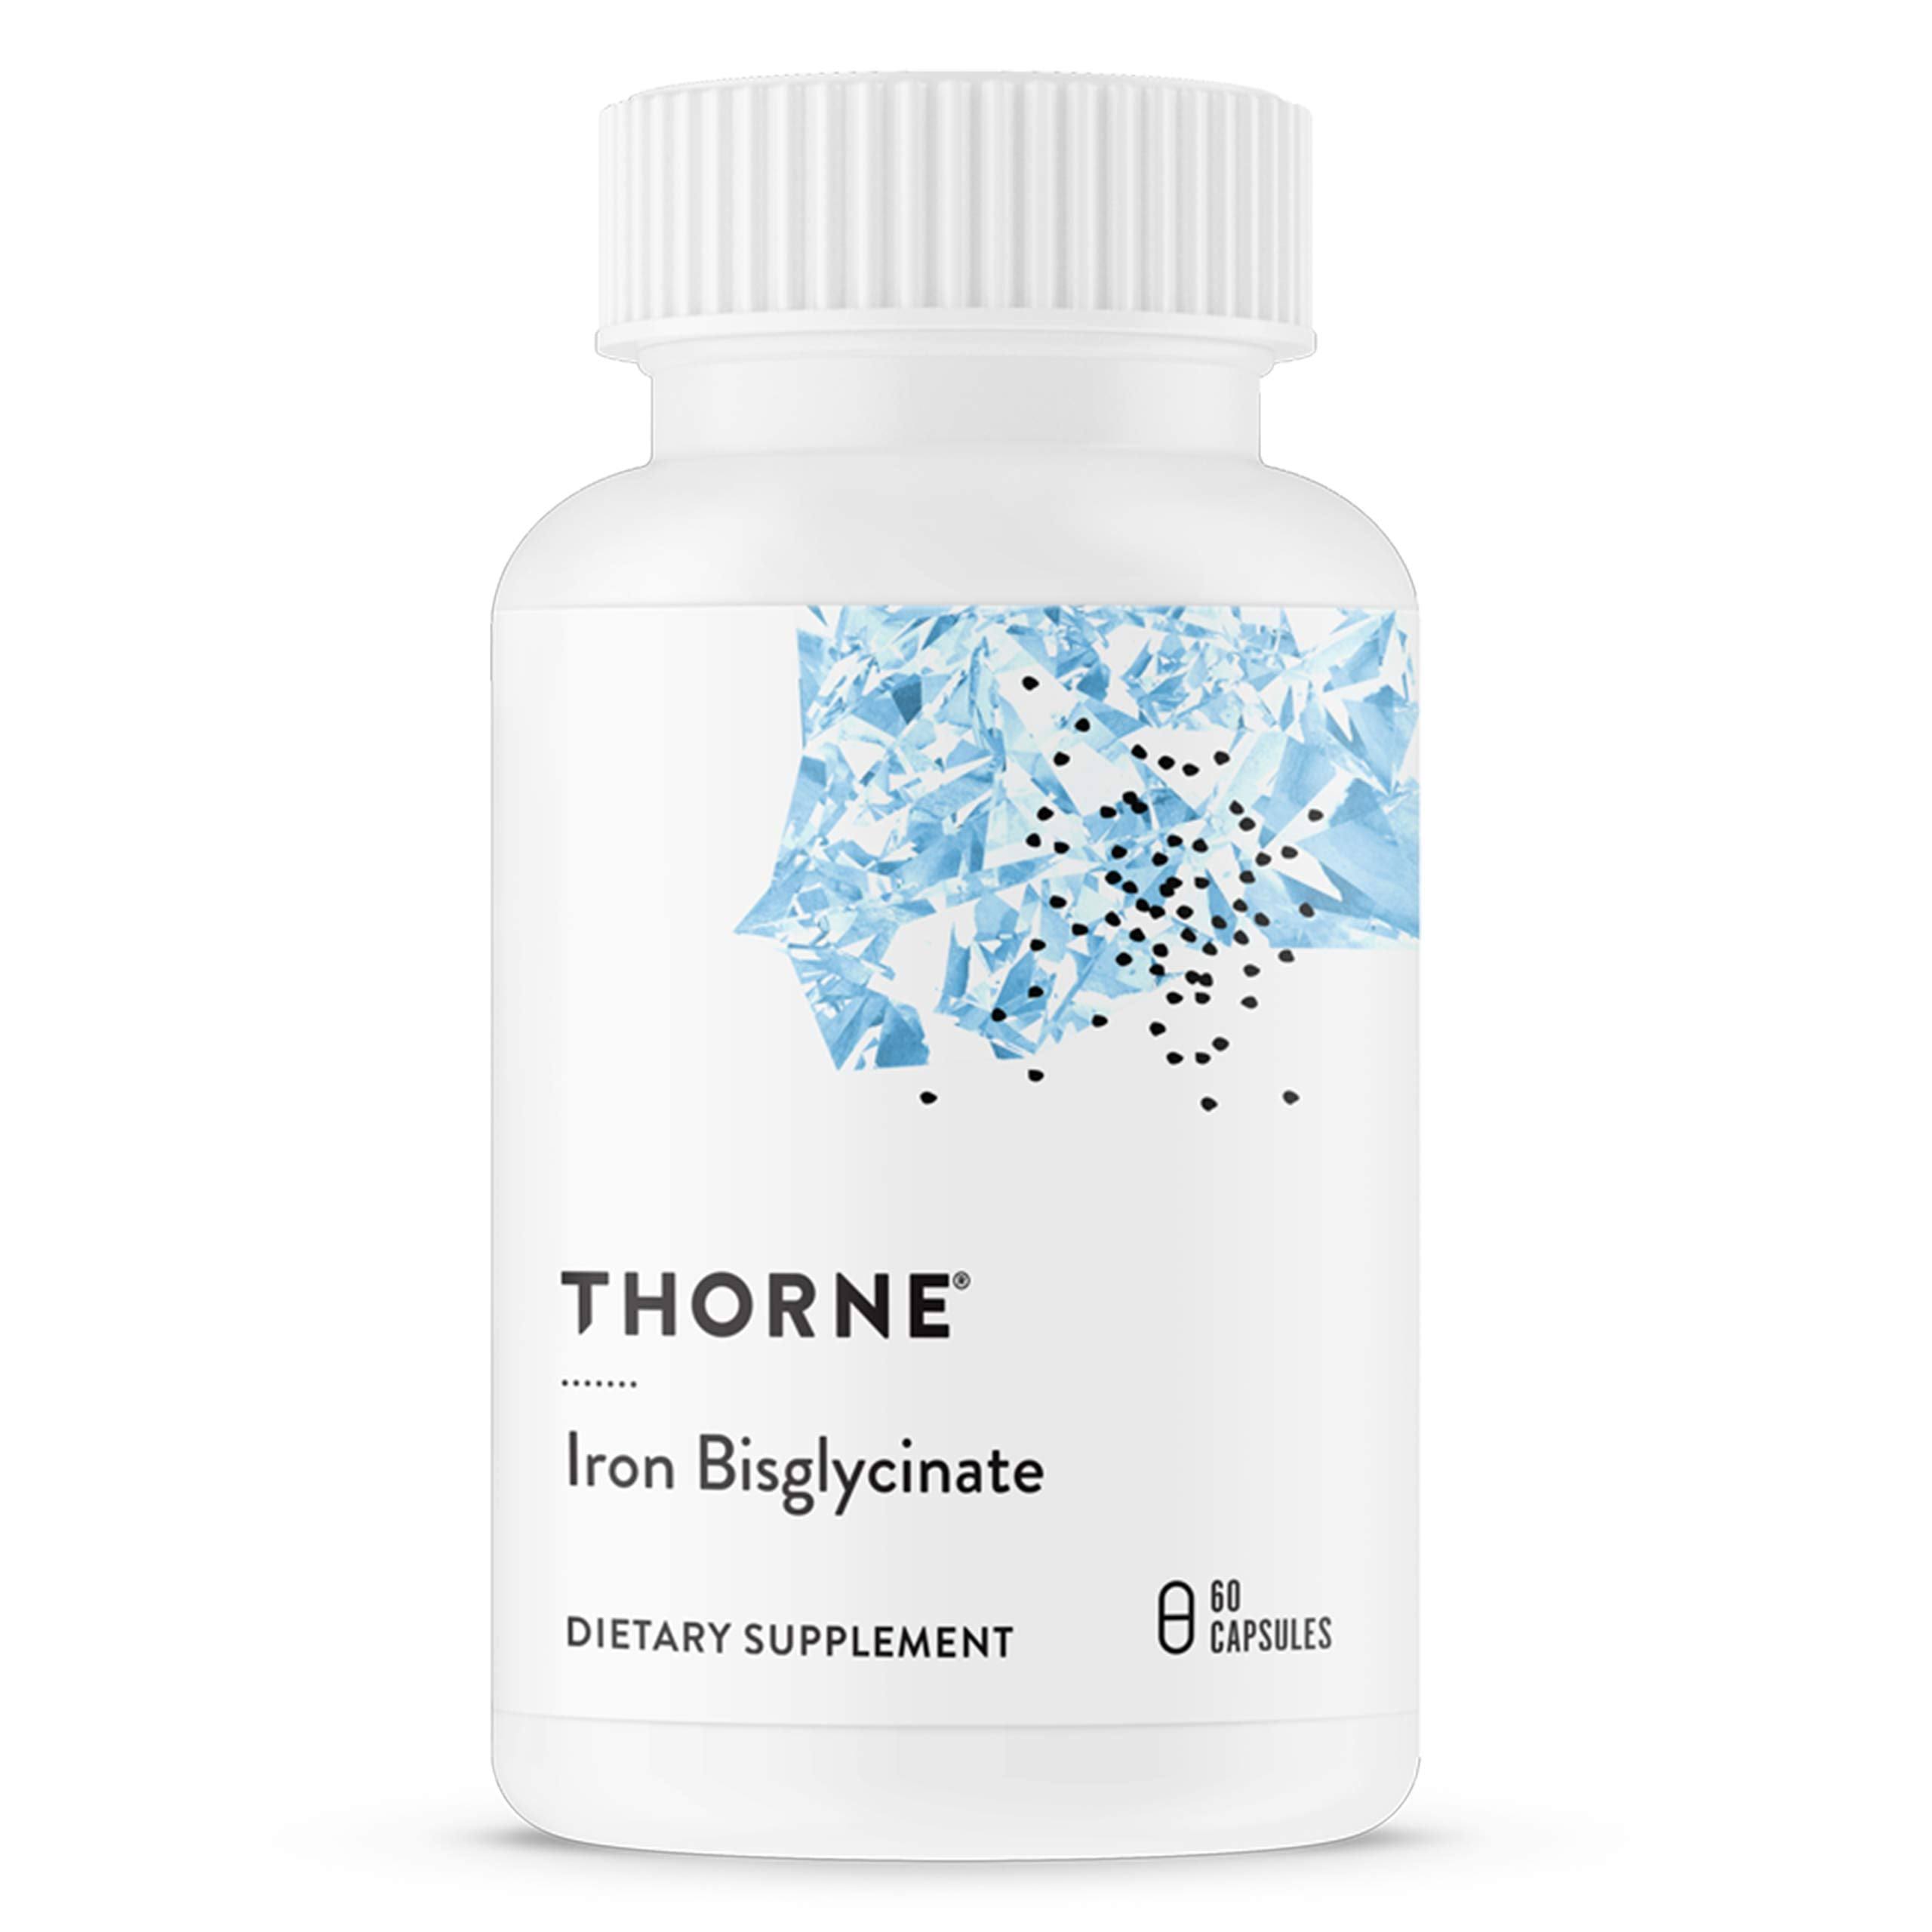 Thorne Research Iron Bisglycinate Dietary Supplement - 60 Capsules